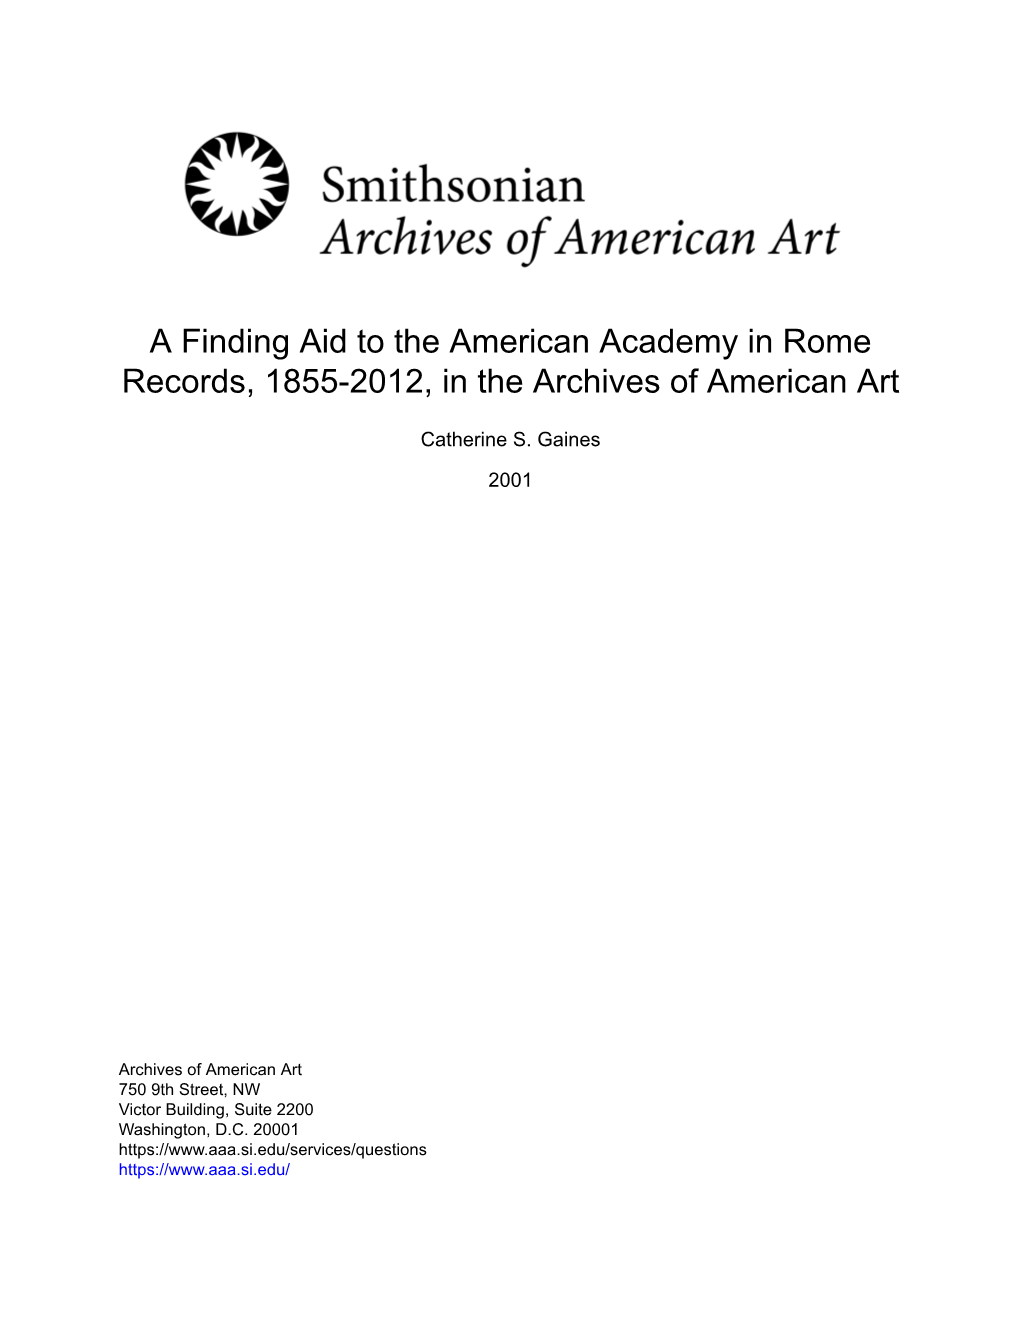 A Finding Aid to the American Academy in Rome Records, 1855-2012, in the Archives of American Art